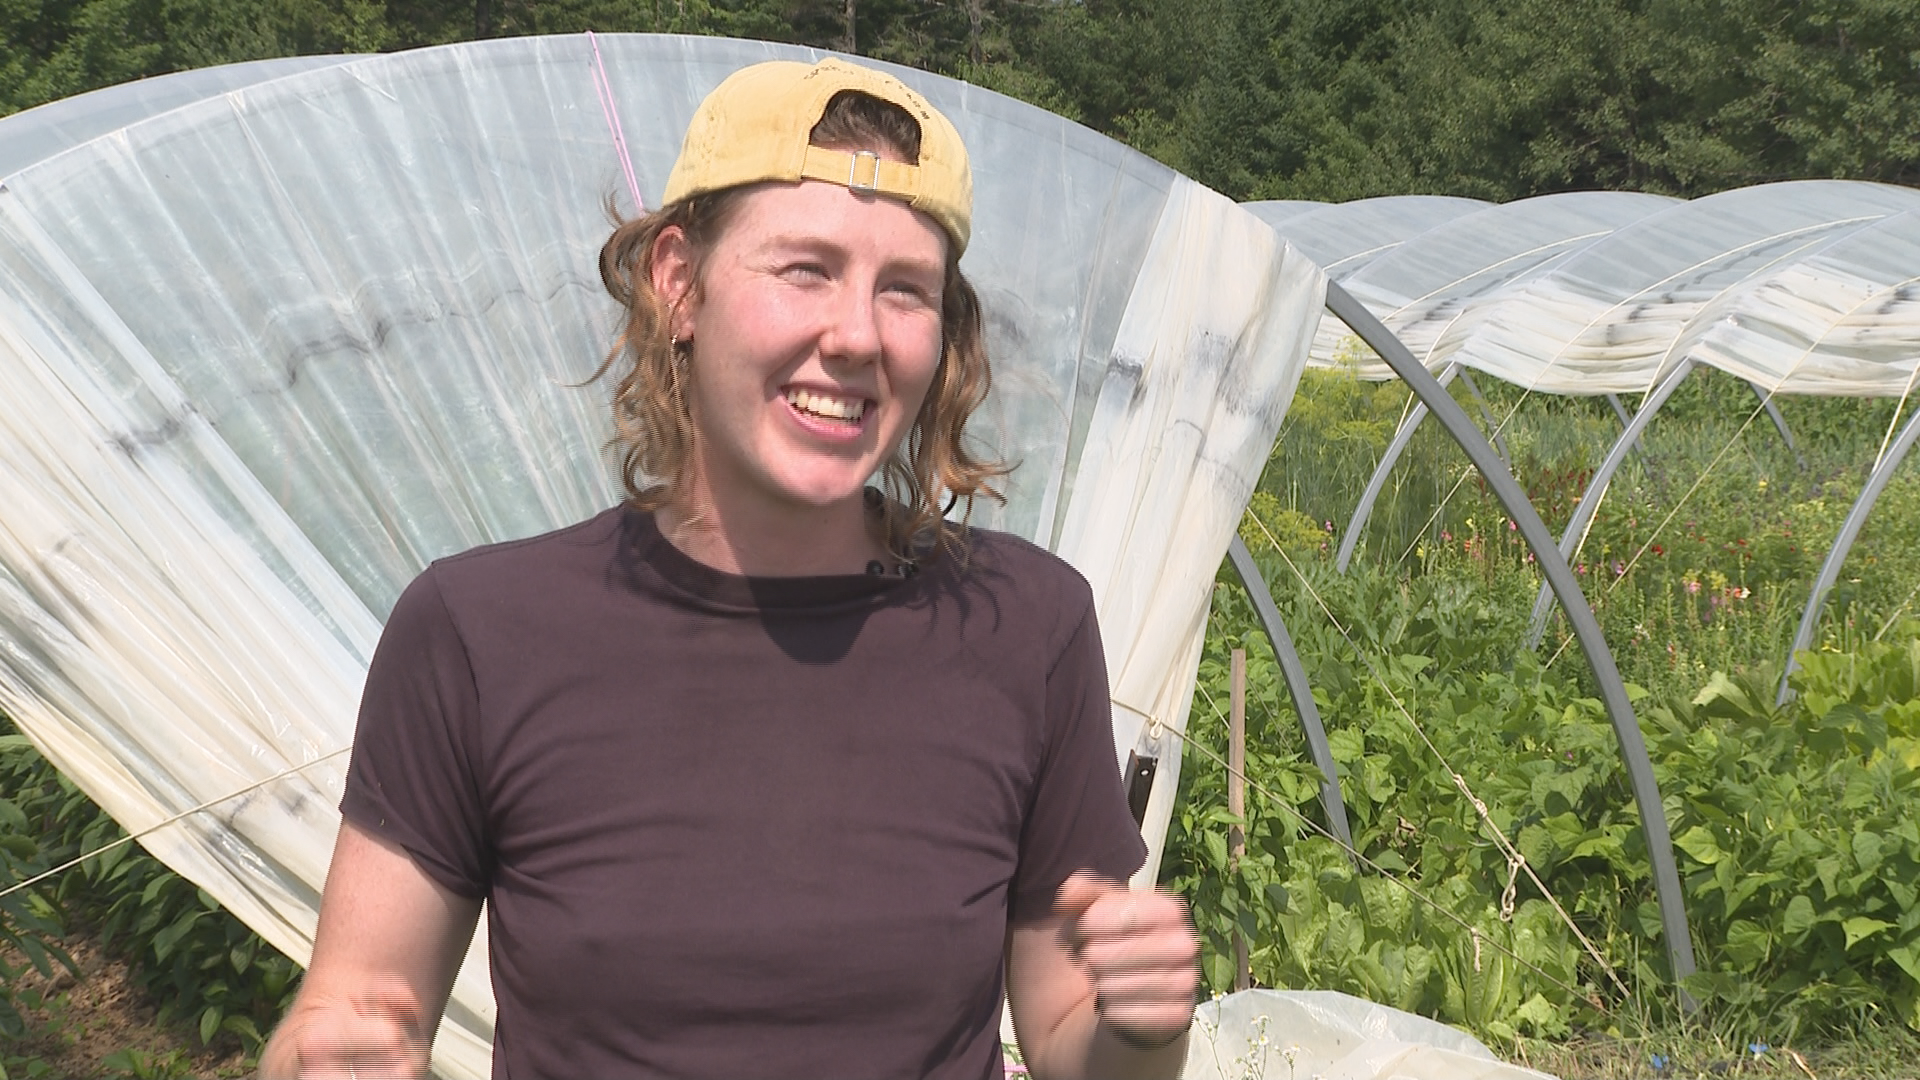 Rebecca MacInnis wants climate action taken to support local growers and consumers.